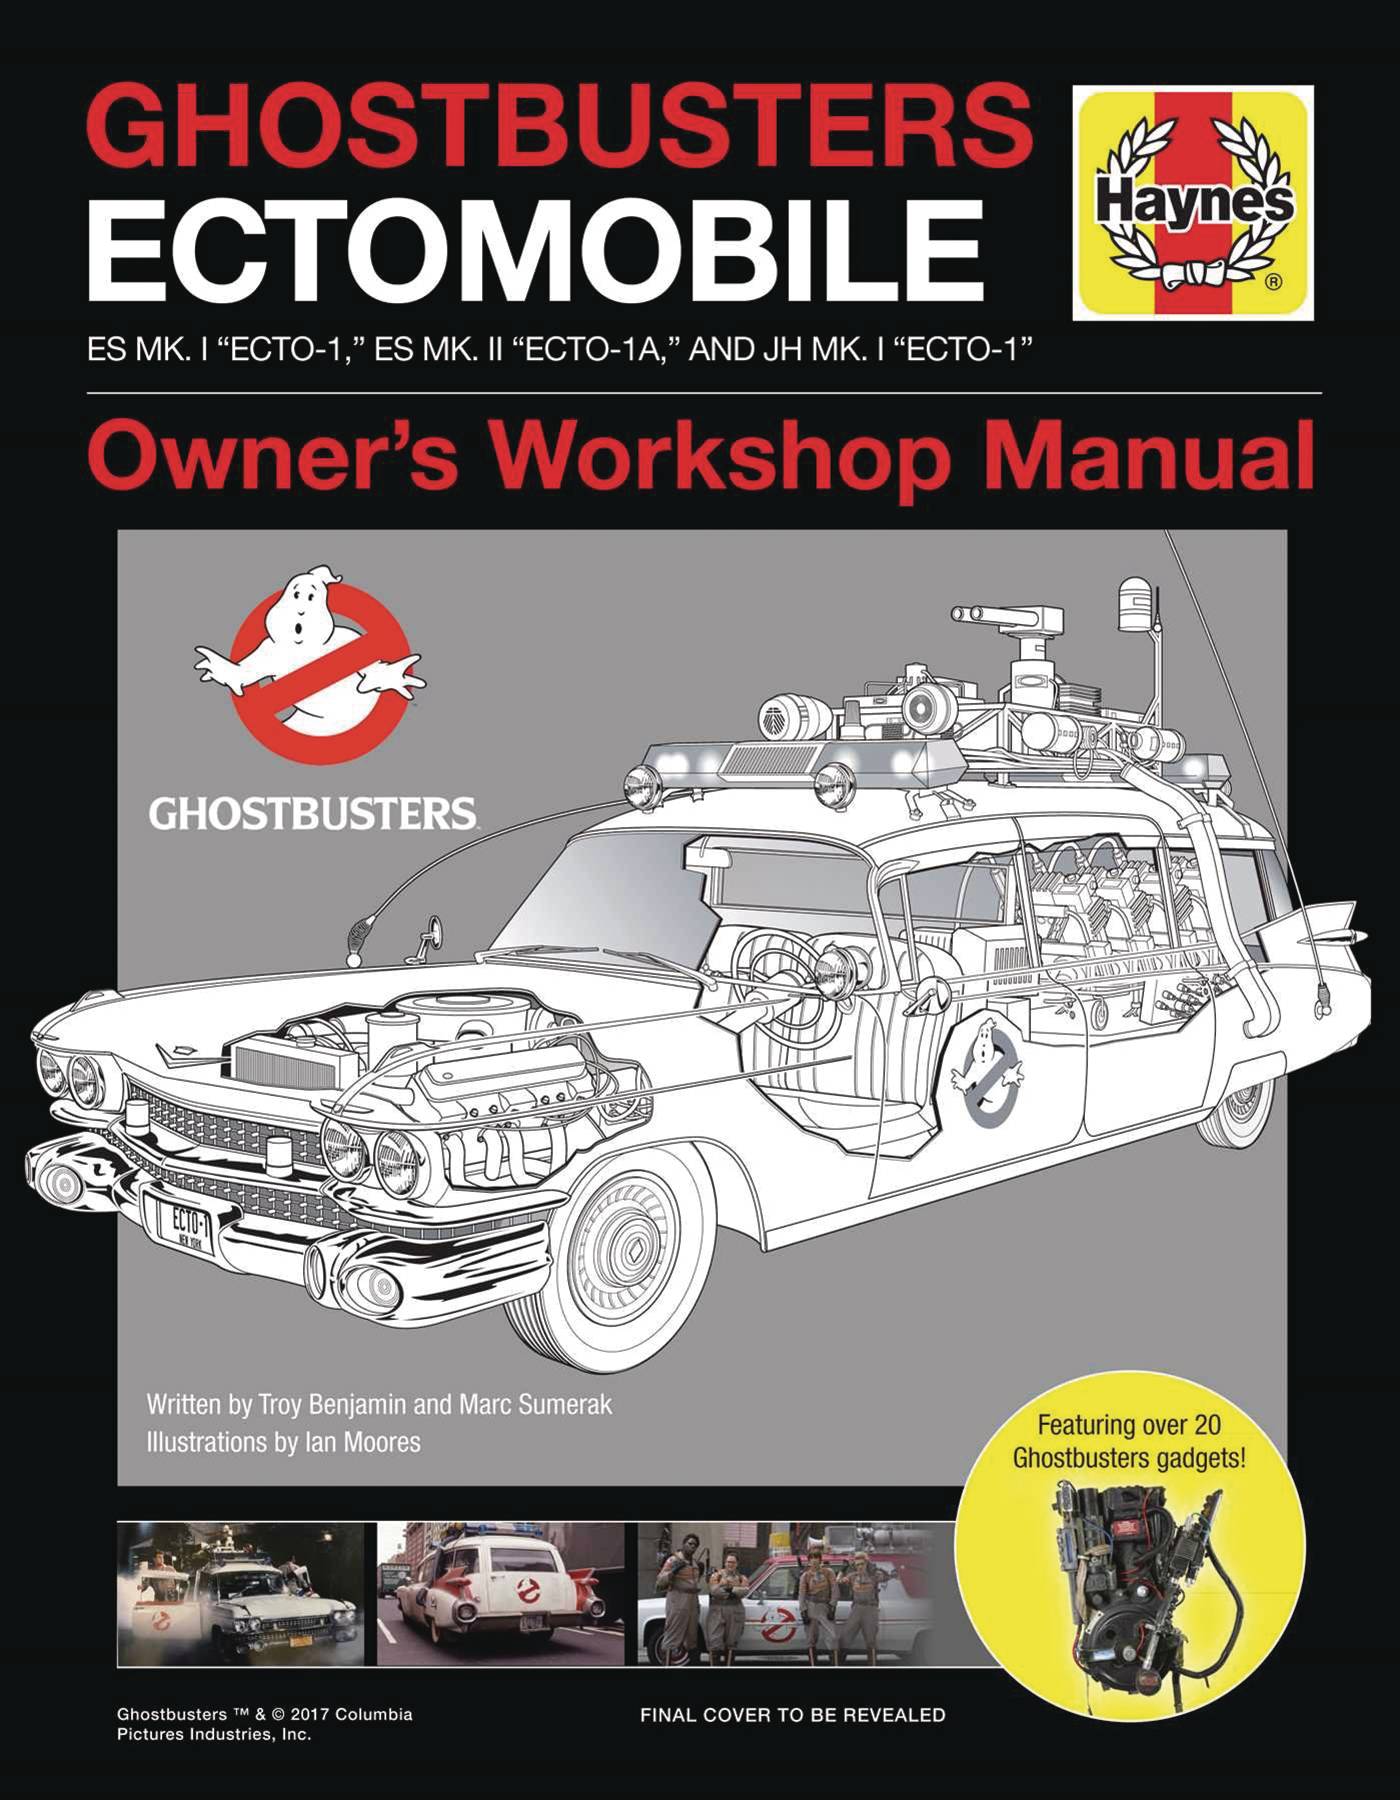 Ghostbusters Ectomobile Owners Workshop Manual Hardcover